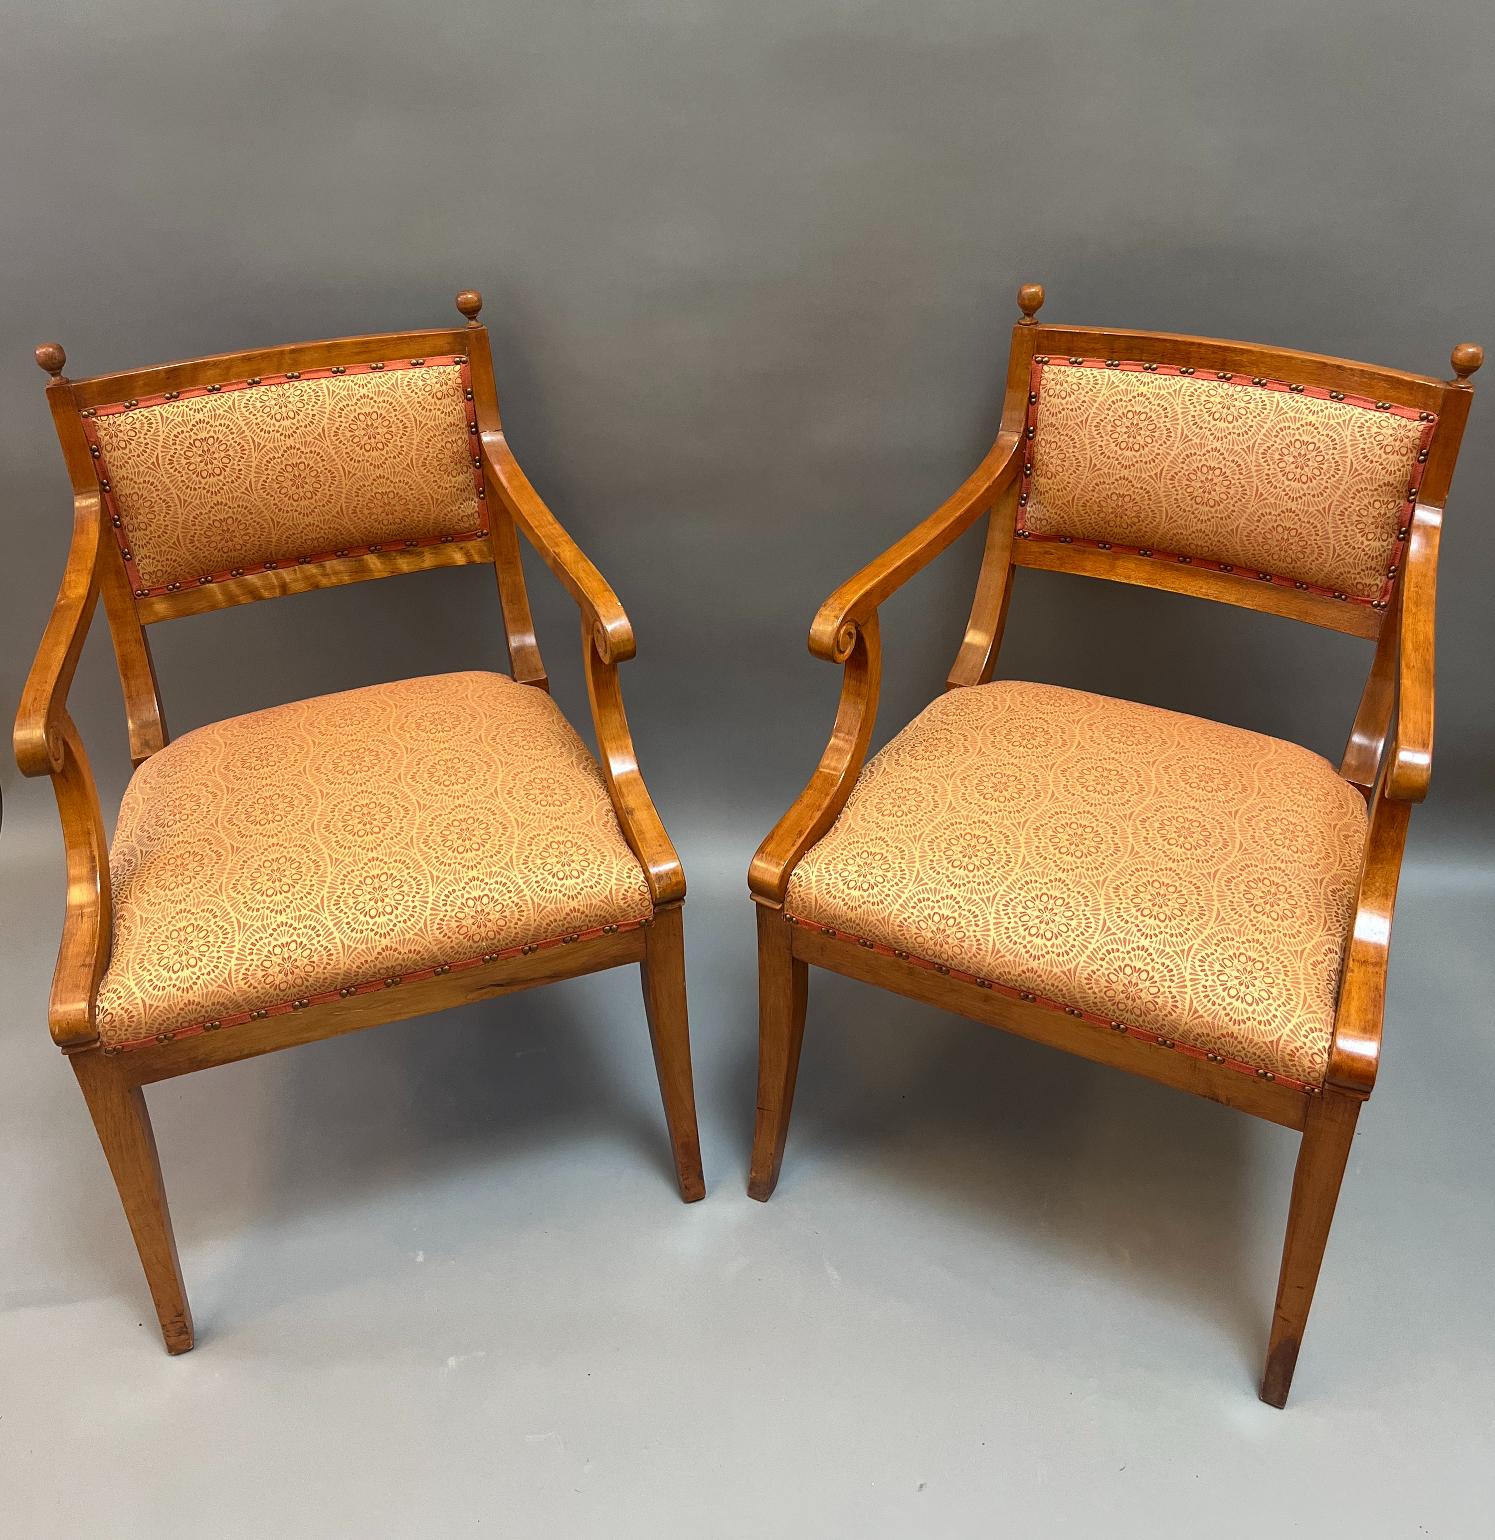 Rare Set of Ten Neoclassical armchairs. Elegant form with saber legs and simple arms . Made of beautiful golden colored birch. Extremely comfortable. Recently reupholstered . Denmark, circa 1840
Measure: 32.5” H 24” W 23”D 19”Seat Height.
 